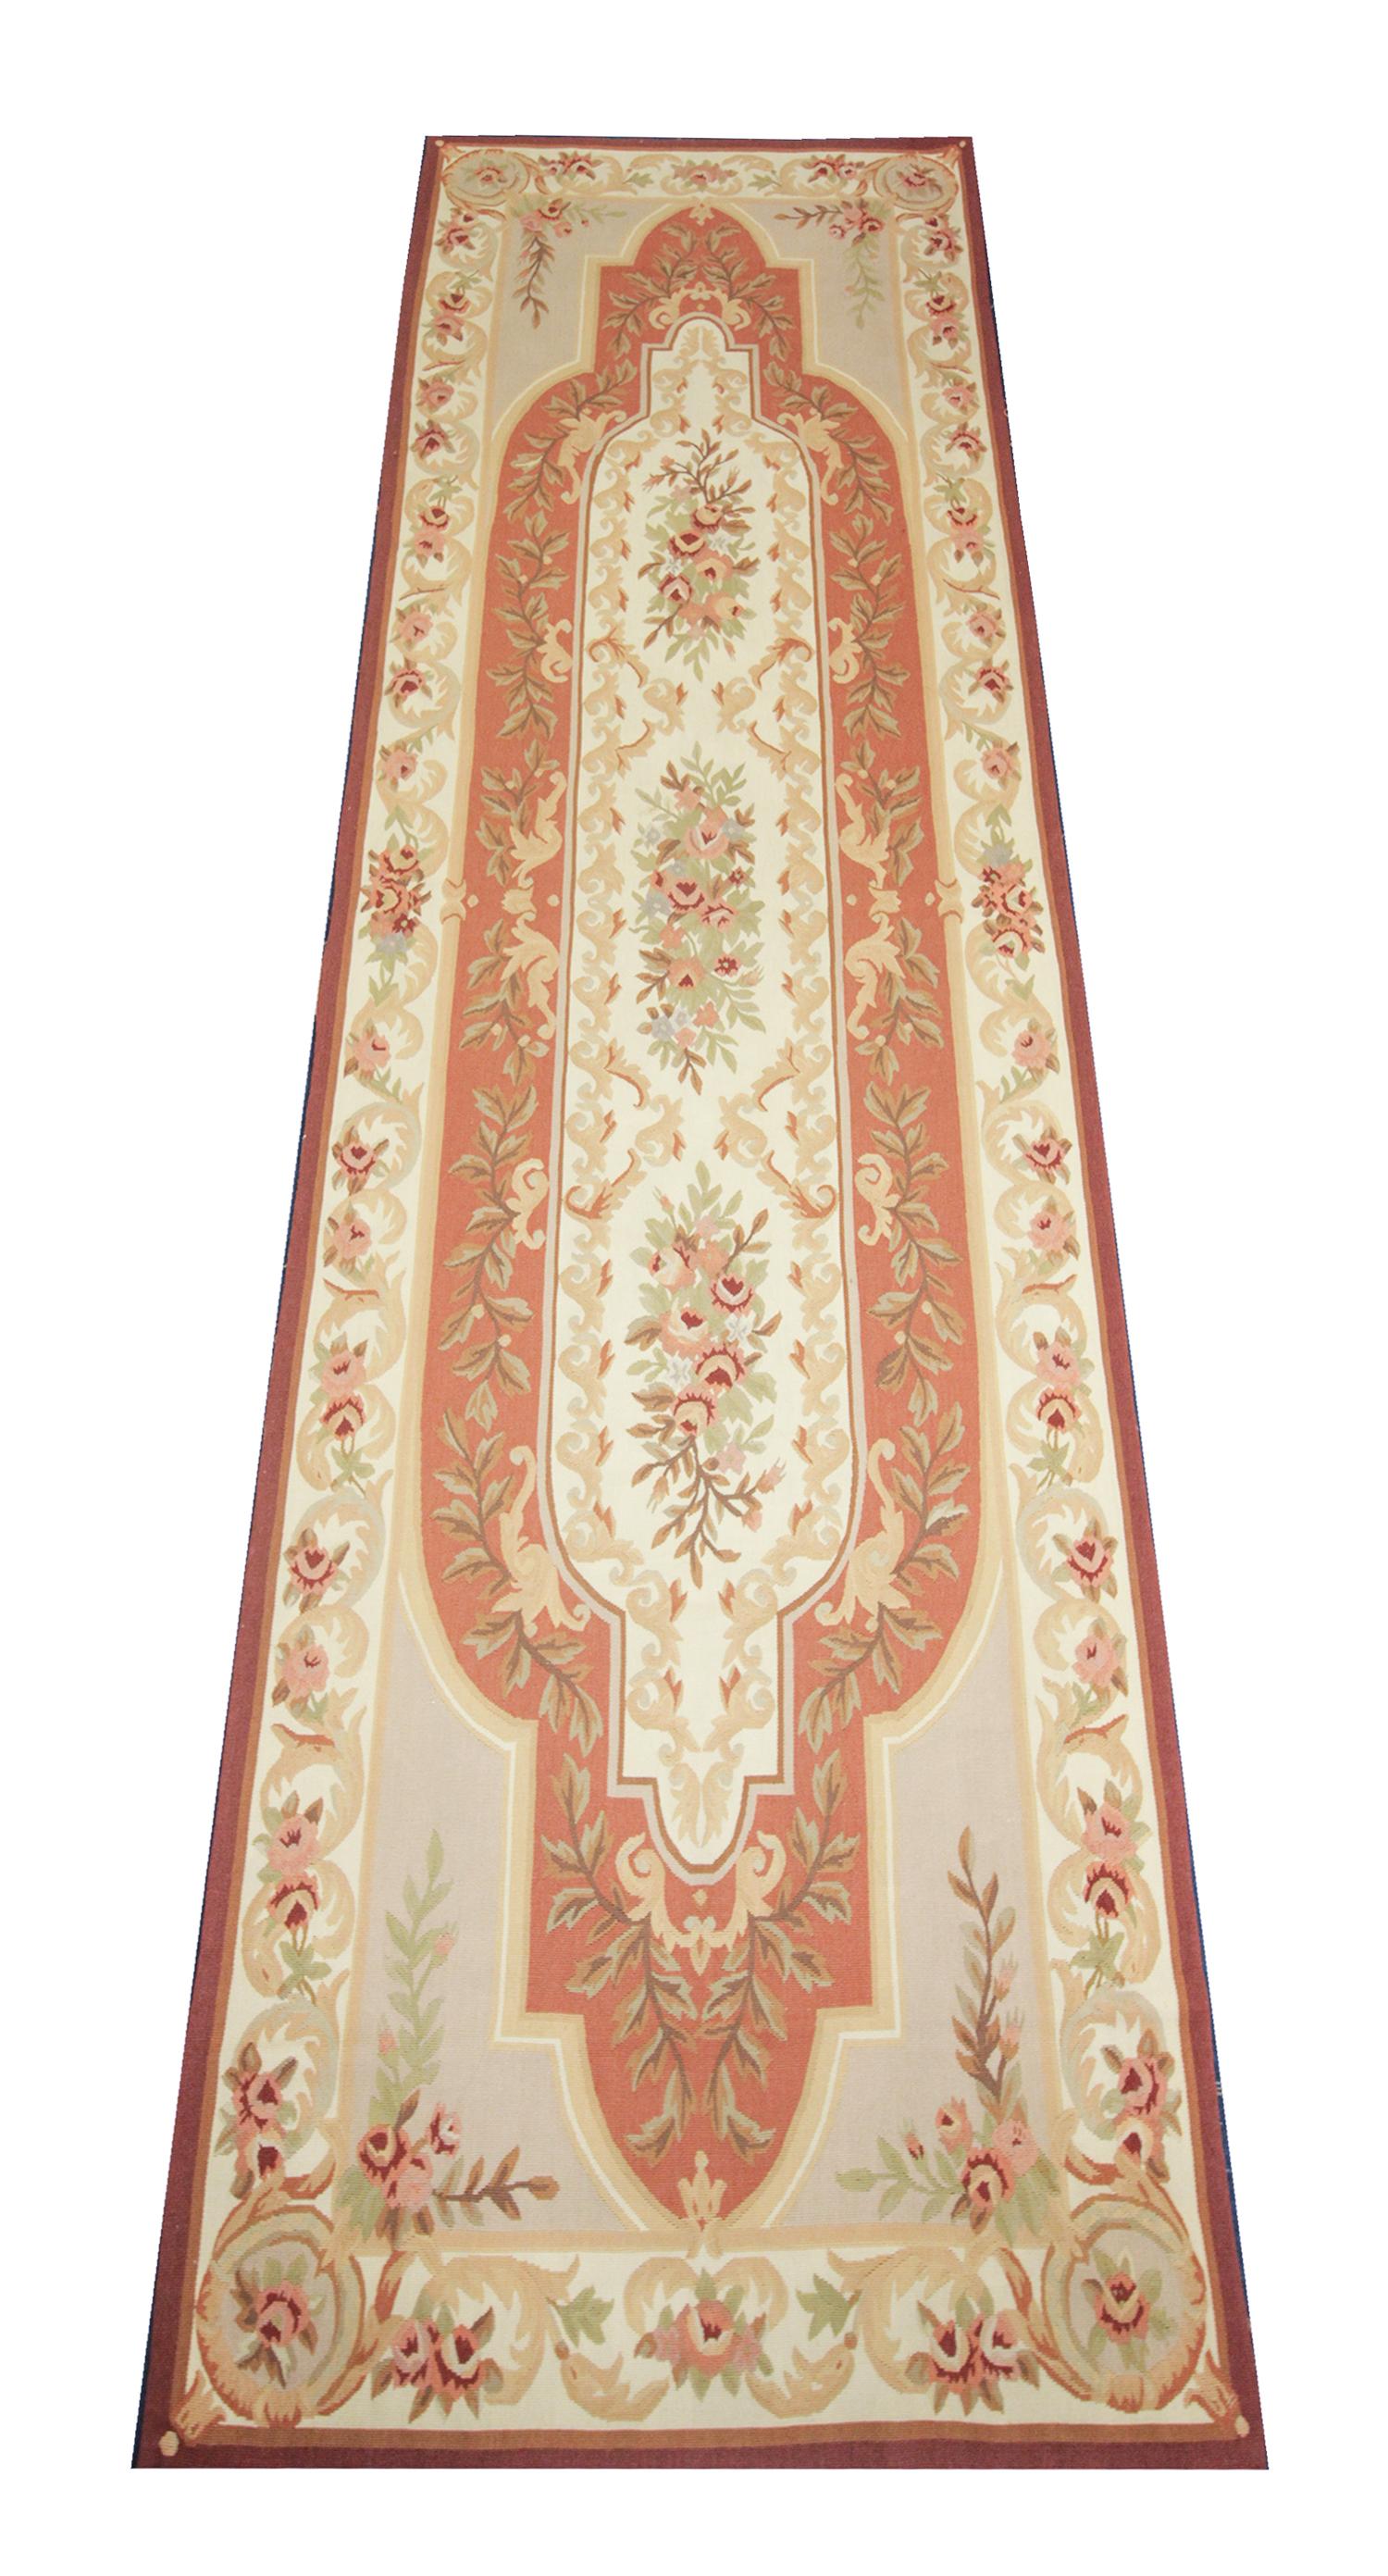 This handwoven oriental needlepoint rug was woven by hand in China in the early 21st century. The central design features a symmetrical floral pattern woven with orange, pink, beige, cream and green accents. This fine oriental rug runner combines